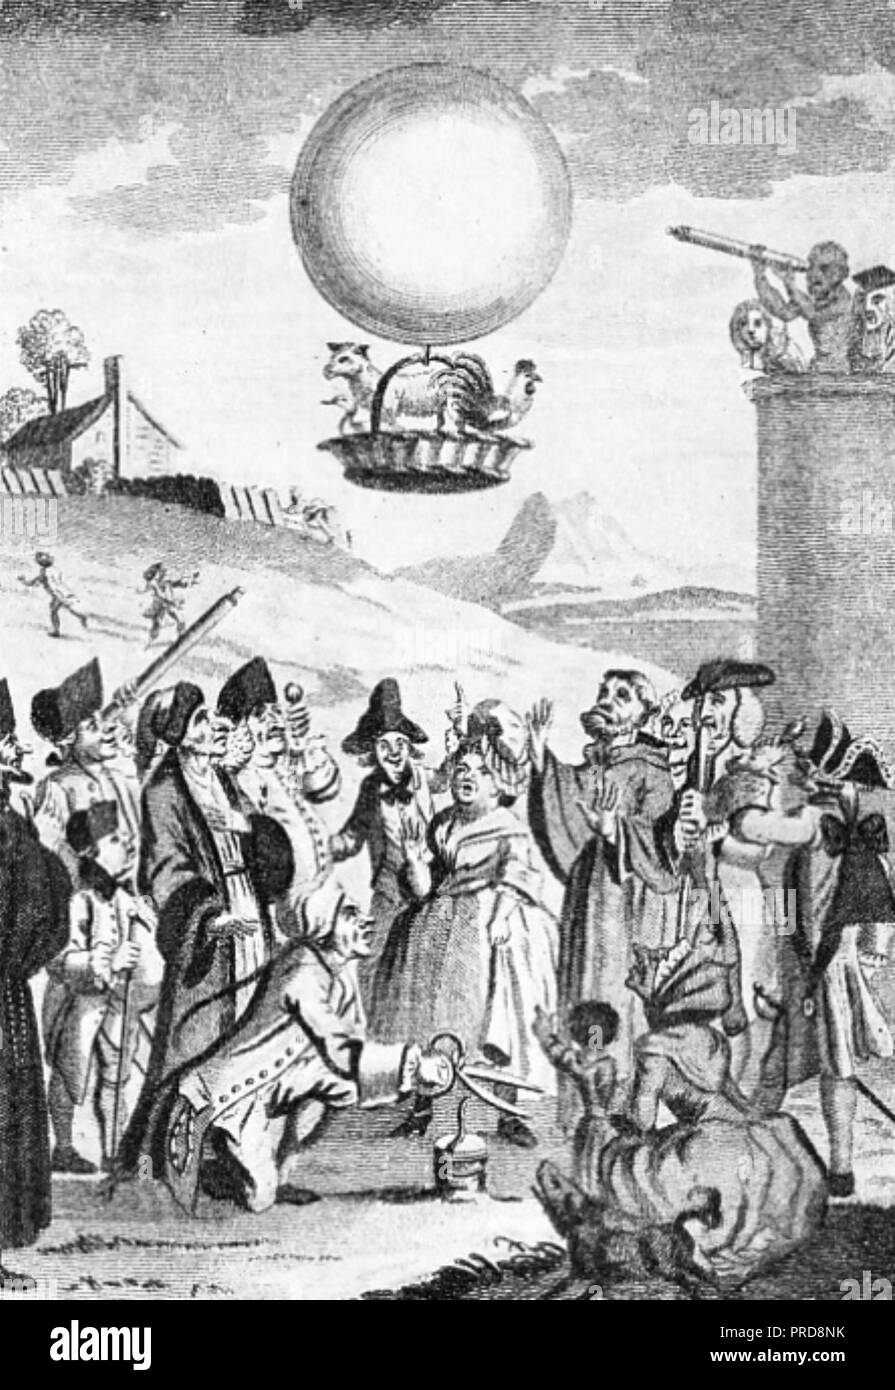 MONTGOLFIER BROTHERS  French engraving  showing their launch of a balloon named the Aérostat Réveillon with a sheep, a duck and a chicken on 19 September 1783. The balloon - actually a hot air vehicle and not a rounded hydrogen type as shown here - travelled two miles. Launched at the Royal Palace at Versailles, the event was watched by Louis XV! and Marie Antoinette Stock Photo